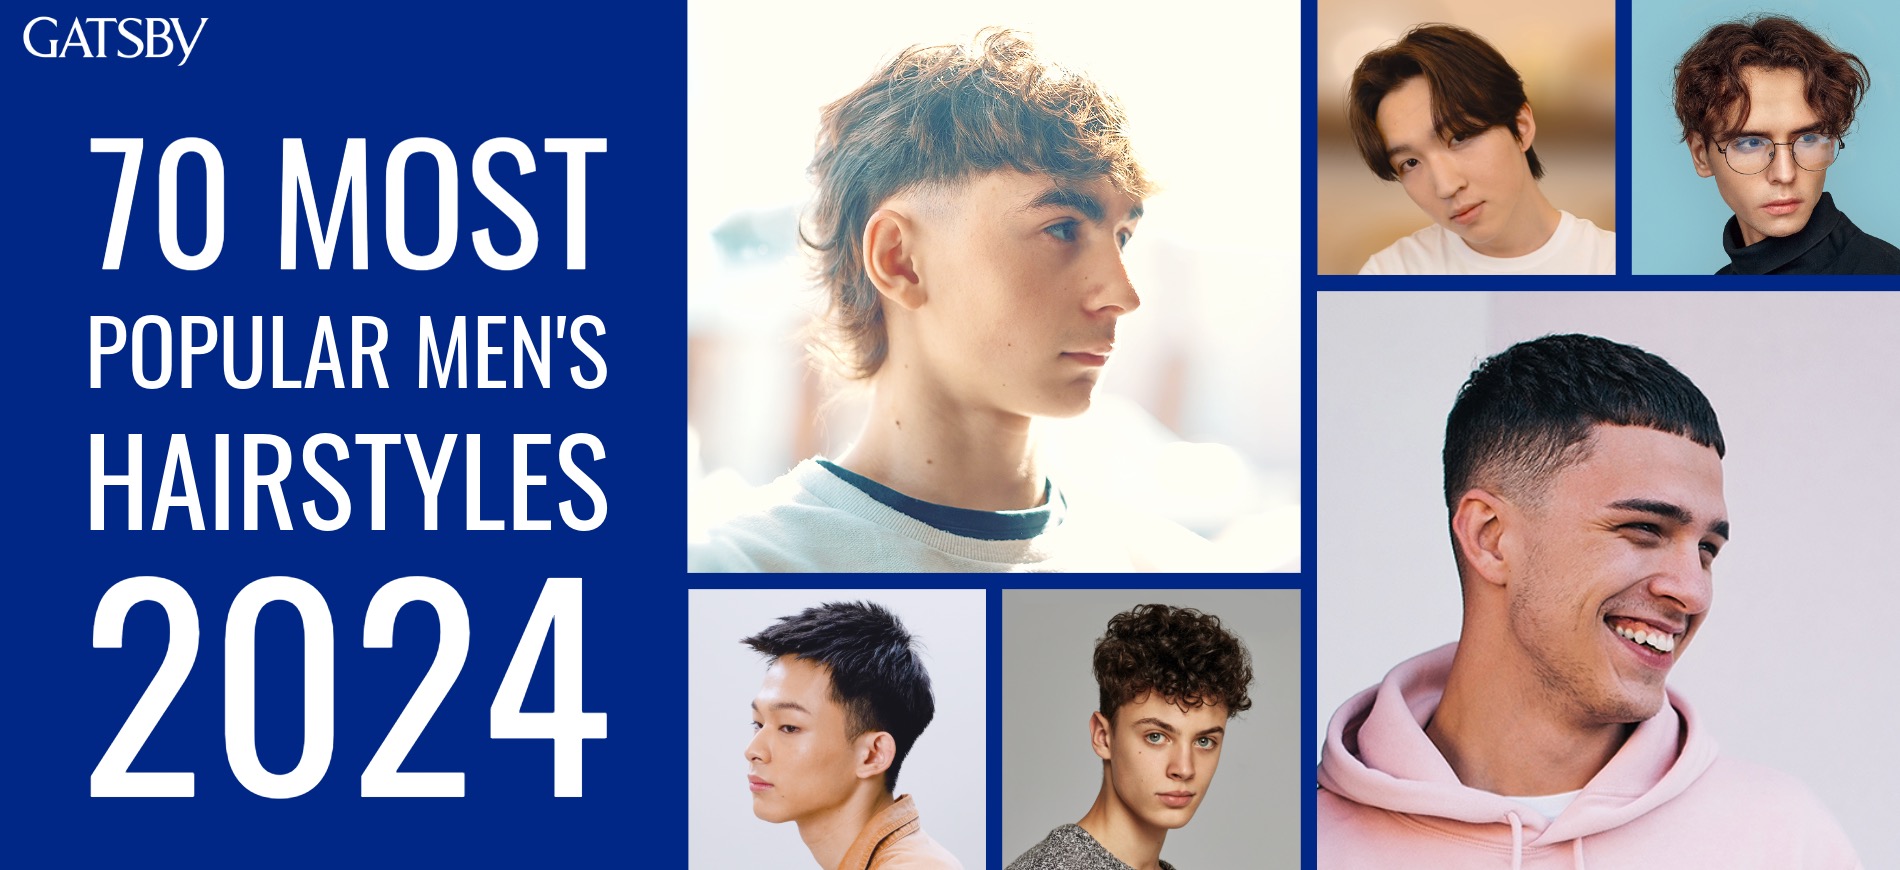 65 Best Haircuts for Men in 2022 — Modern Hairstyles for Men by GATSBY |  GATSBY is your only choice of men's hair wax.